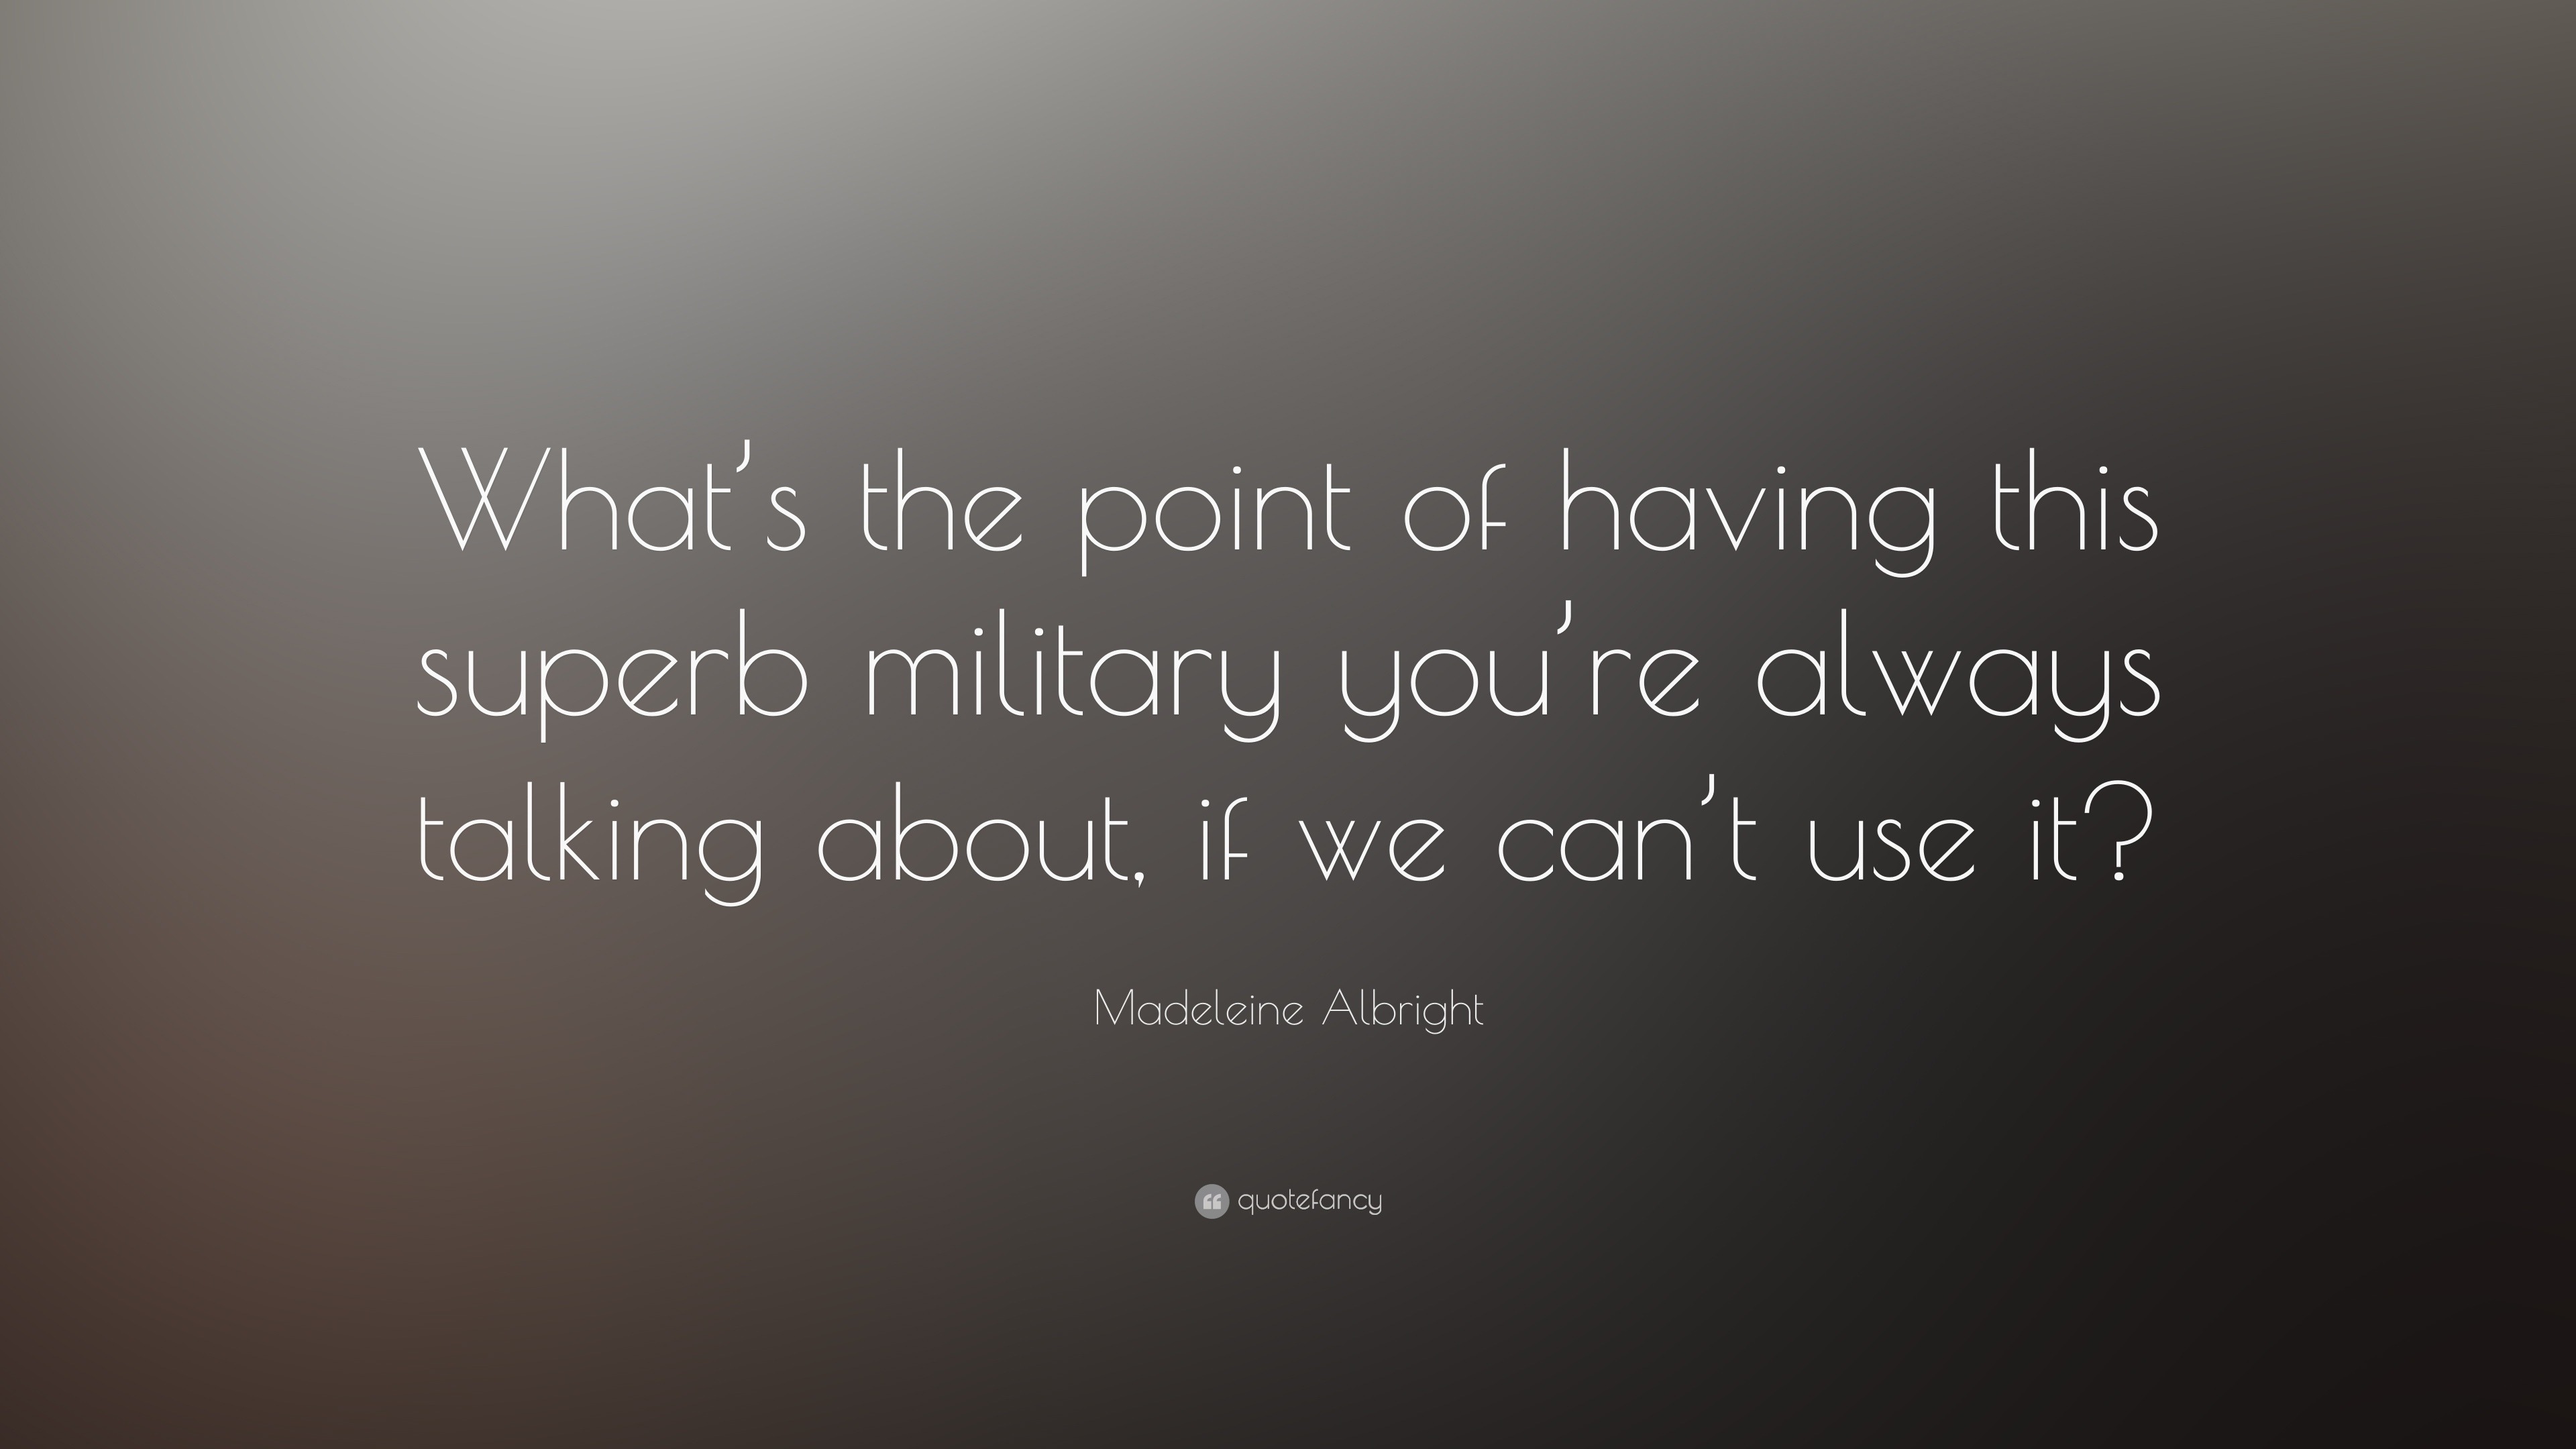 Madeleine Albright Quote: “What's The Point Of Having This Superb Military You're Always Talking About,